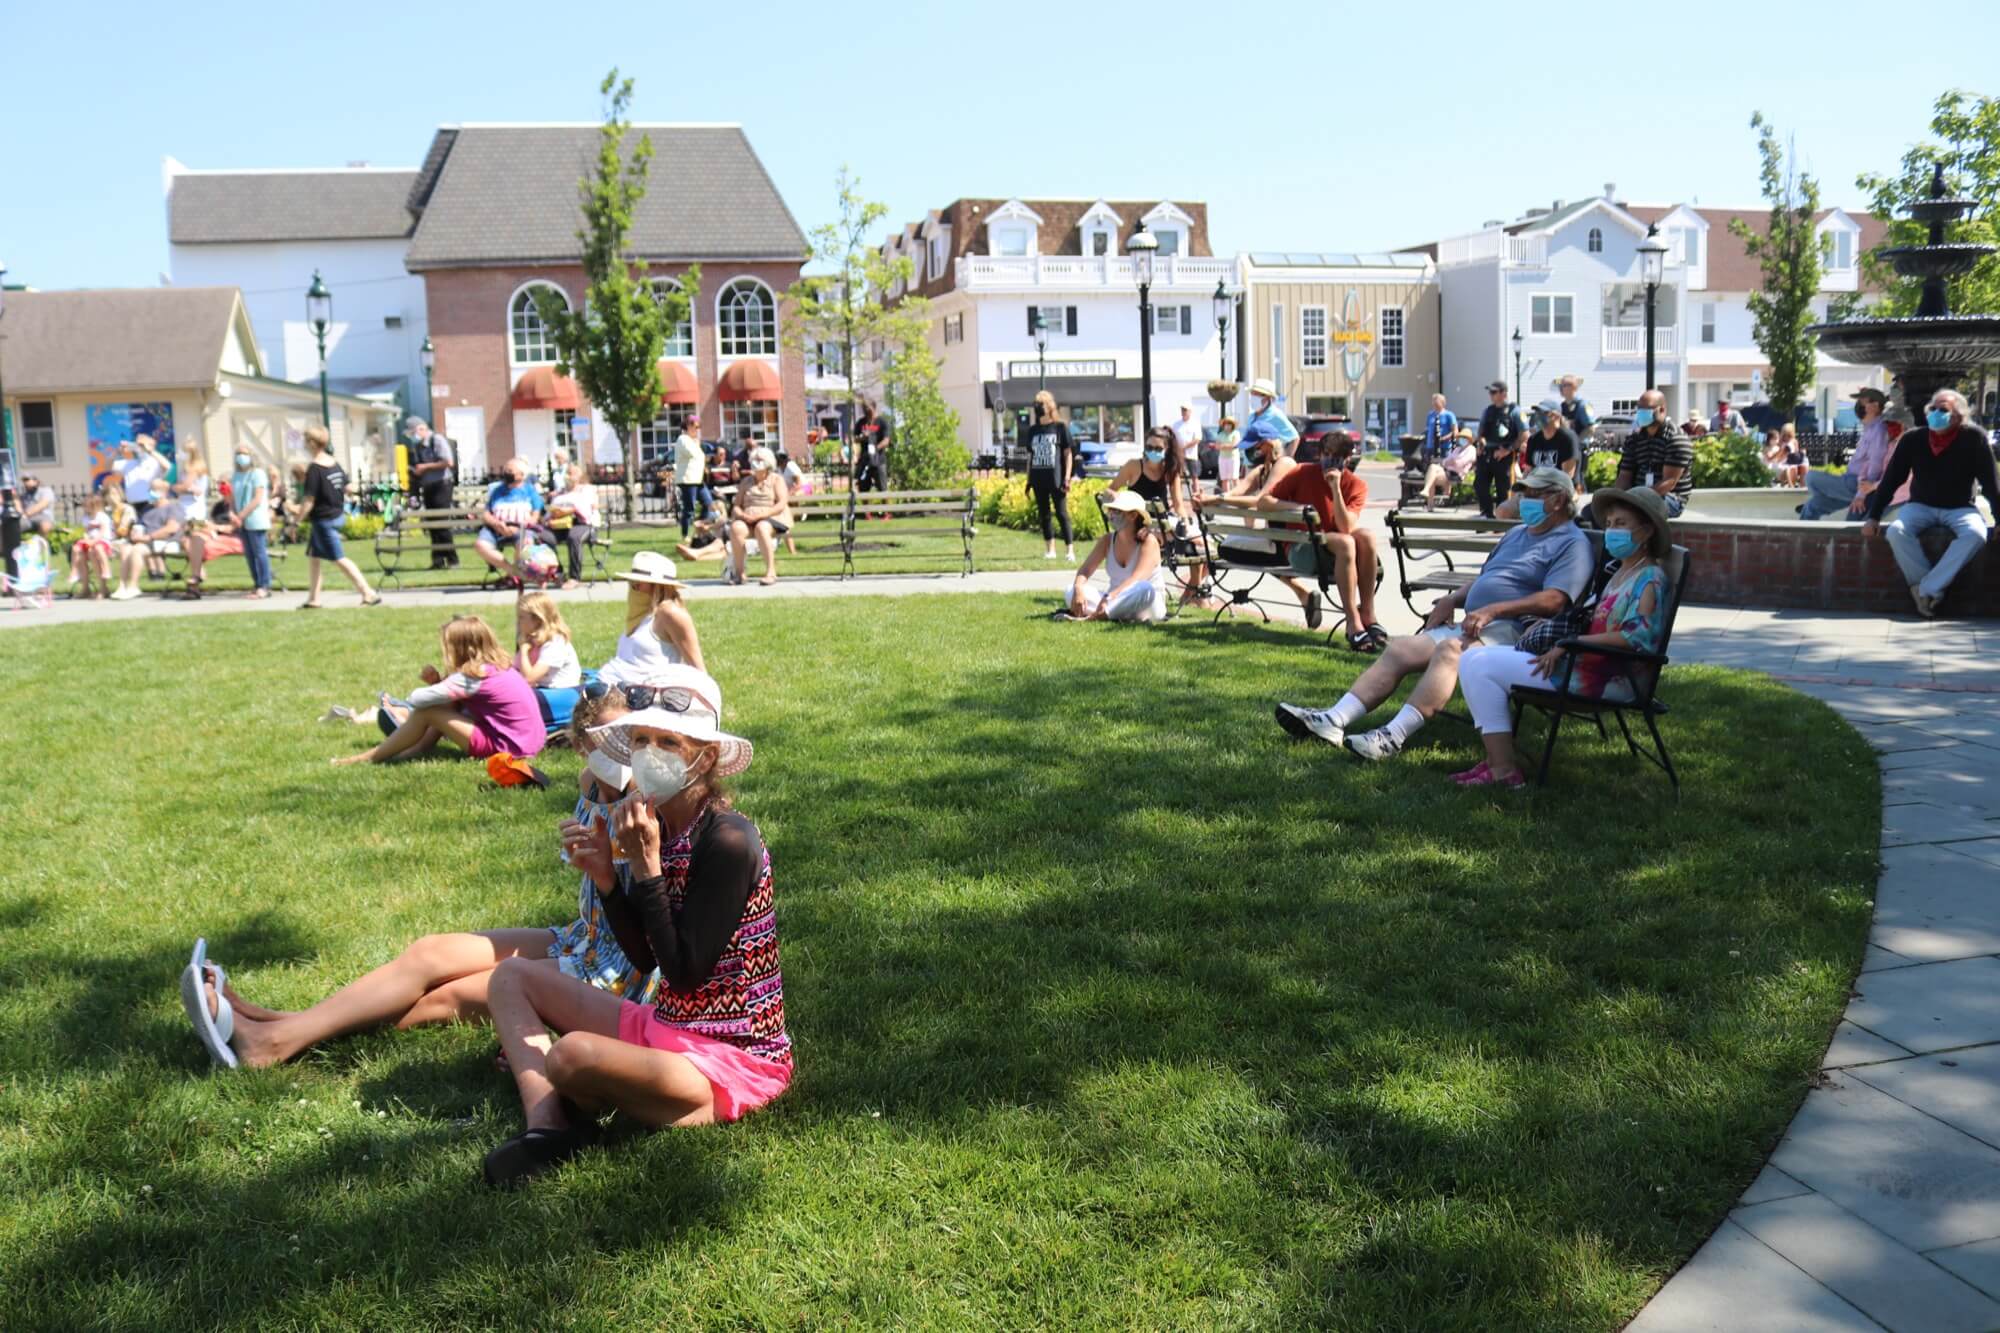 Residents gathered in Rotary Park June 19 to mark the opening of the Harriet Tubman Museum of Cape May